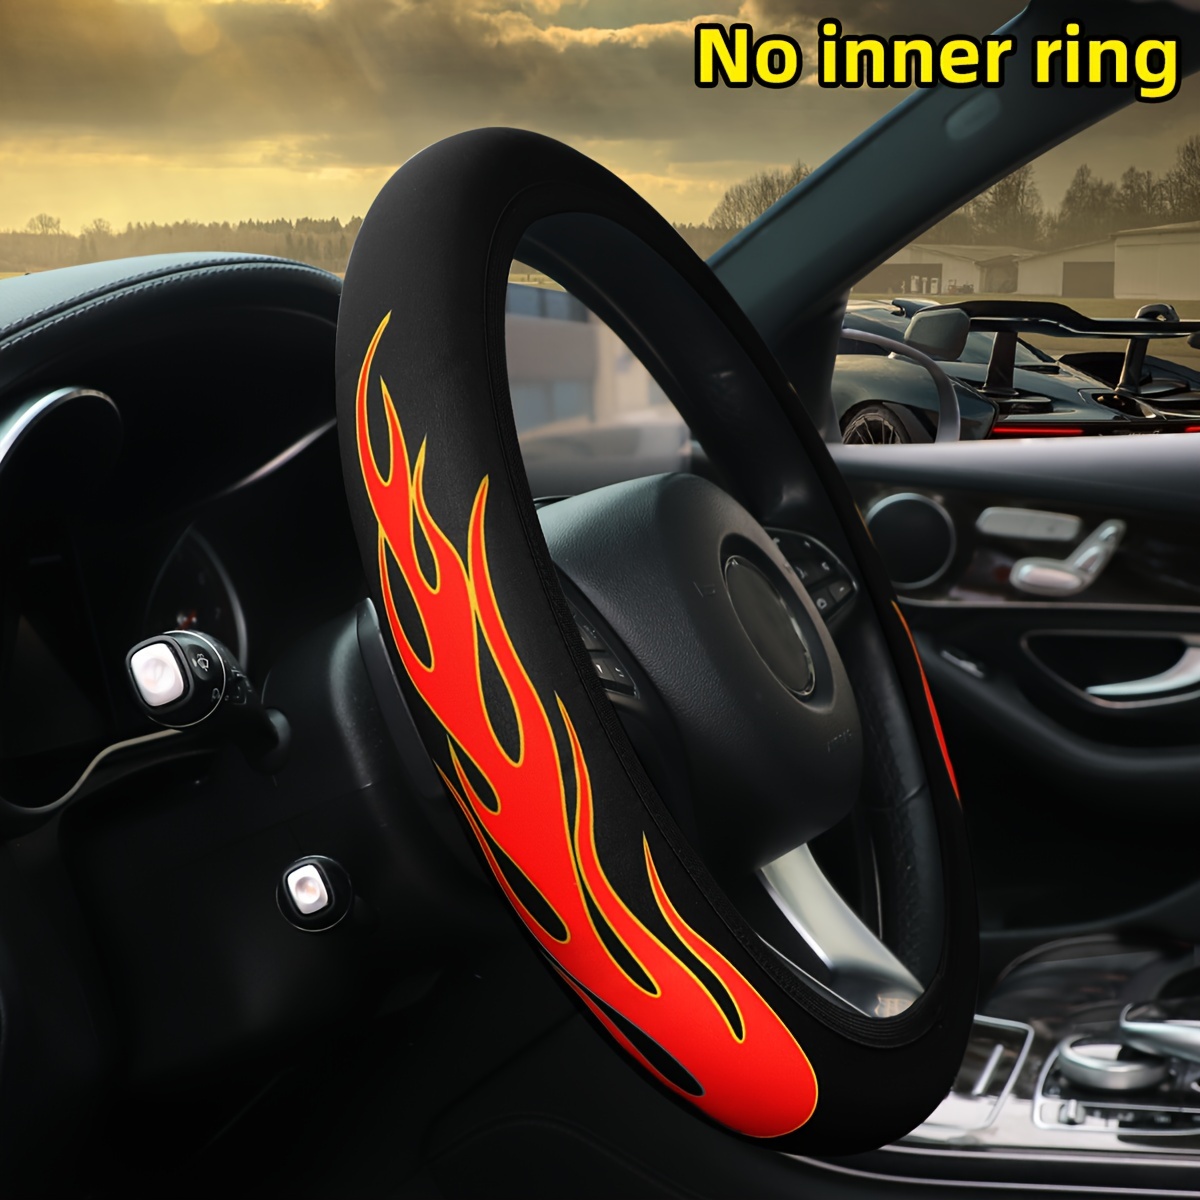 

Flame Pattern Polyester Fiber Steering Wheel Cover, No Inner Circle, Anti-slip Waterproof Car Accessory, Fits 14.5-15 Inch D-type And Round Steering Wheels.